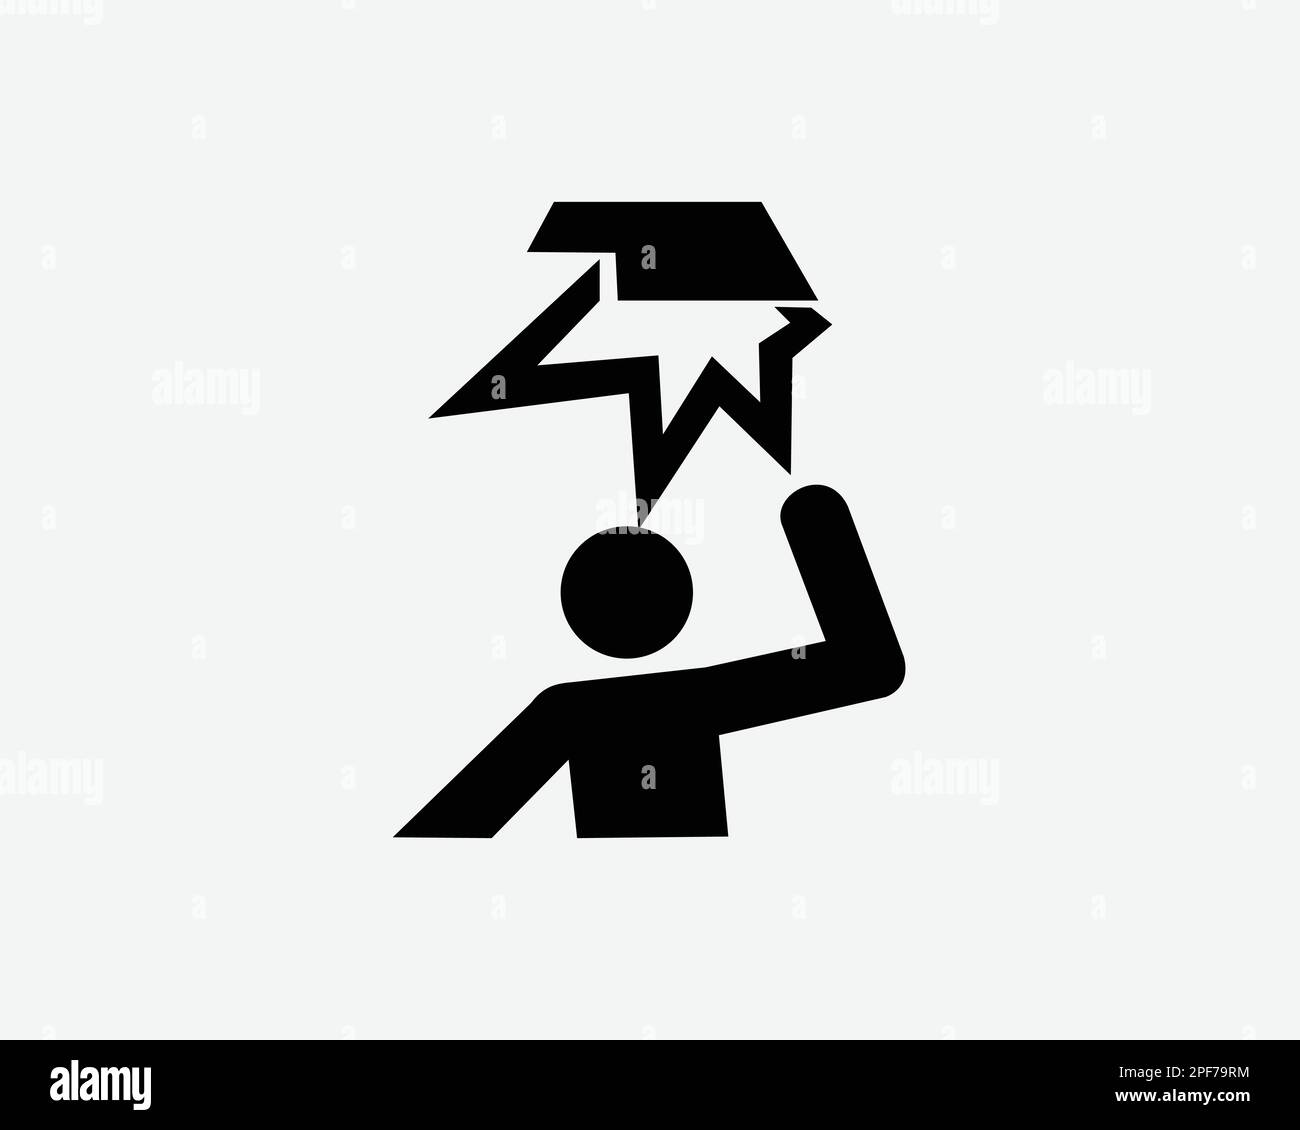 Overhead Obstacle Icon Beware of Head Object Accident Hit Black White Silhouette Symbol Sign Graphic Clipart Artwork Illustration Pictogram Vector Stock Vector